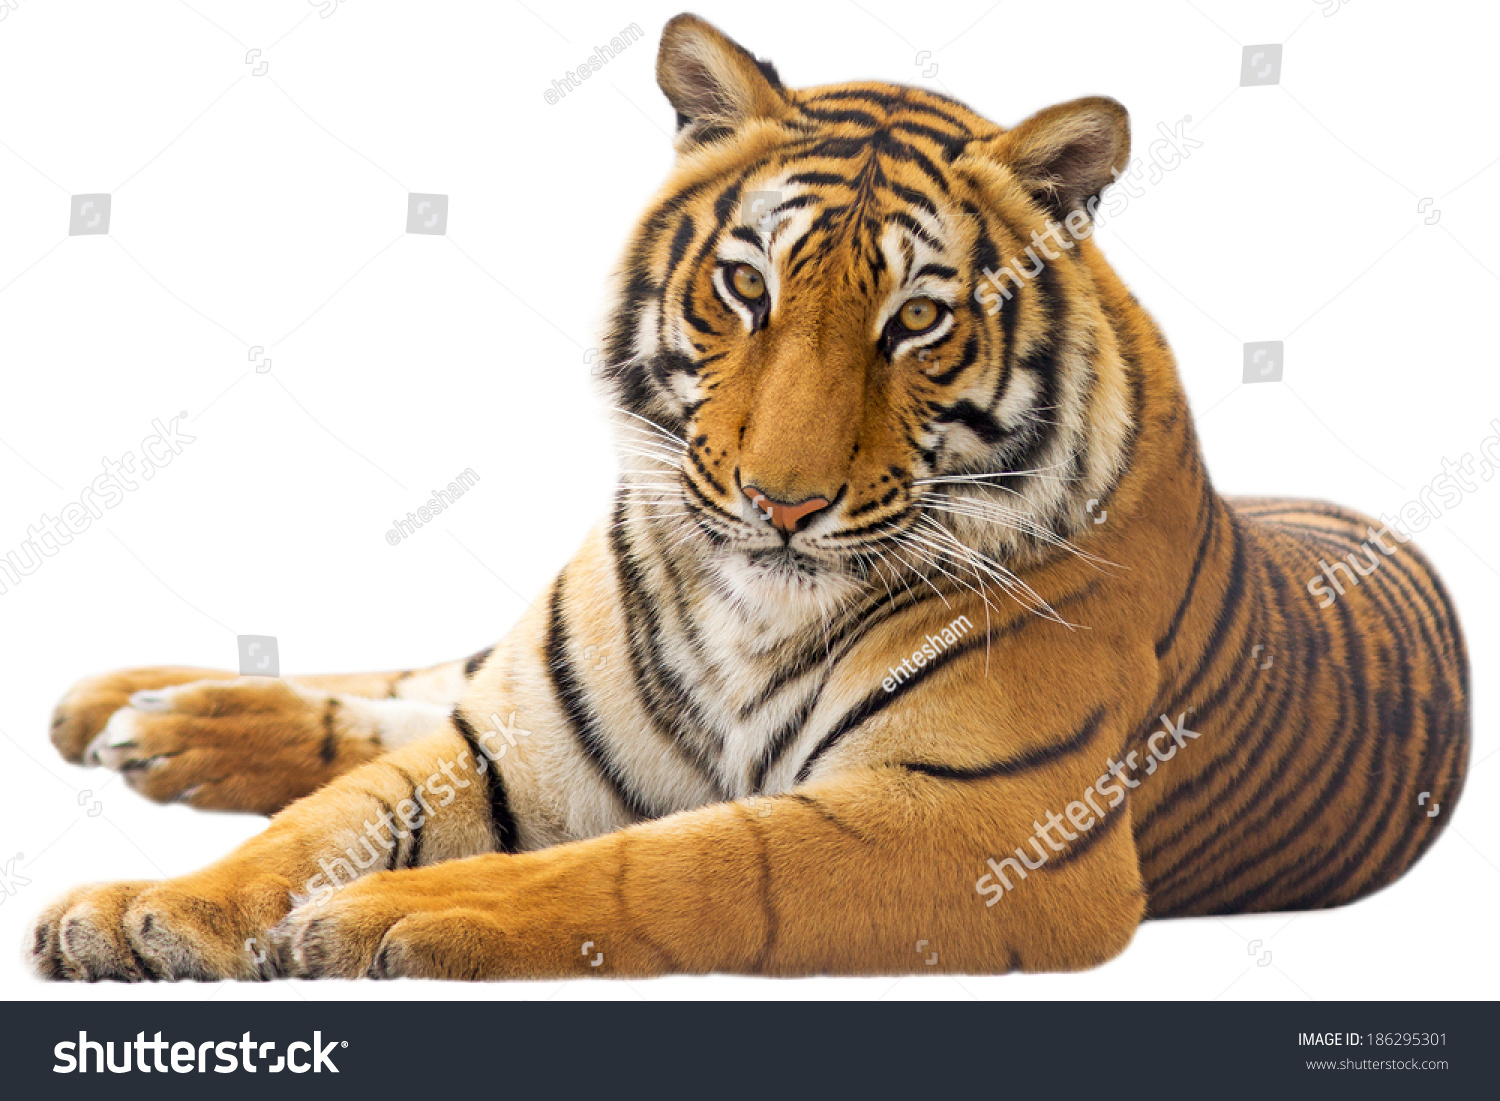 Beautiful tiger - isolated on white background #186295301